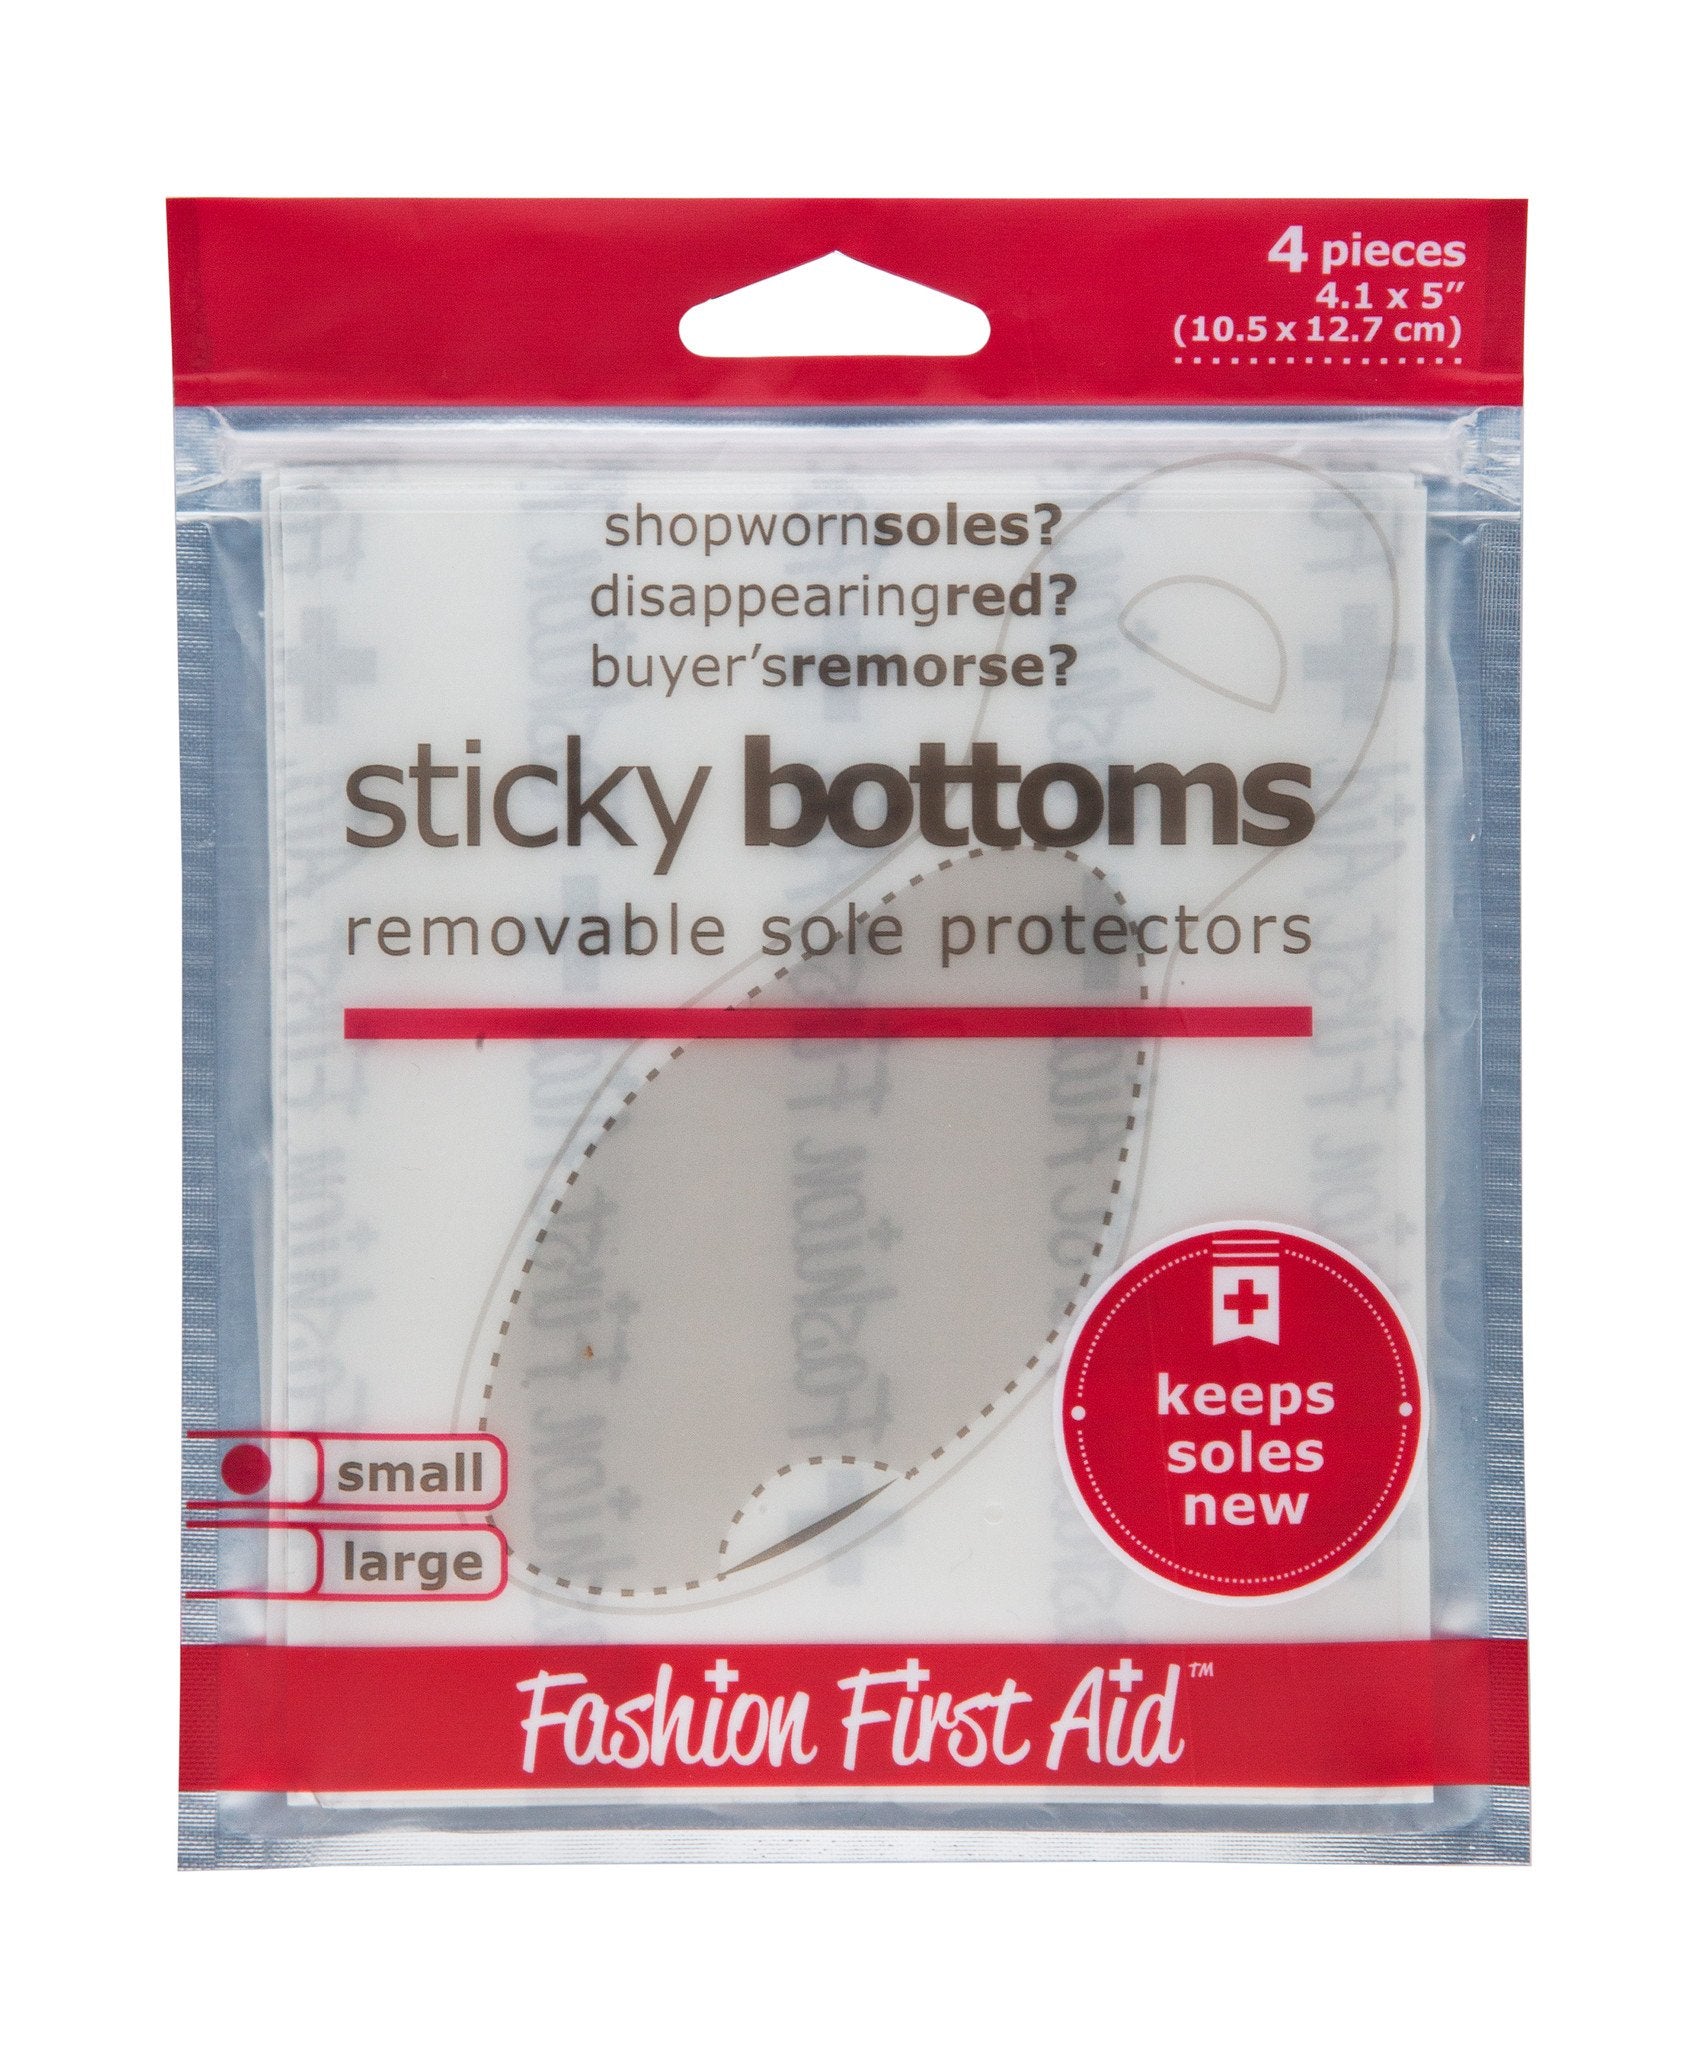 Sticky Bottoms: removable sole protectors